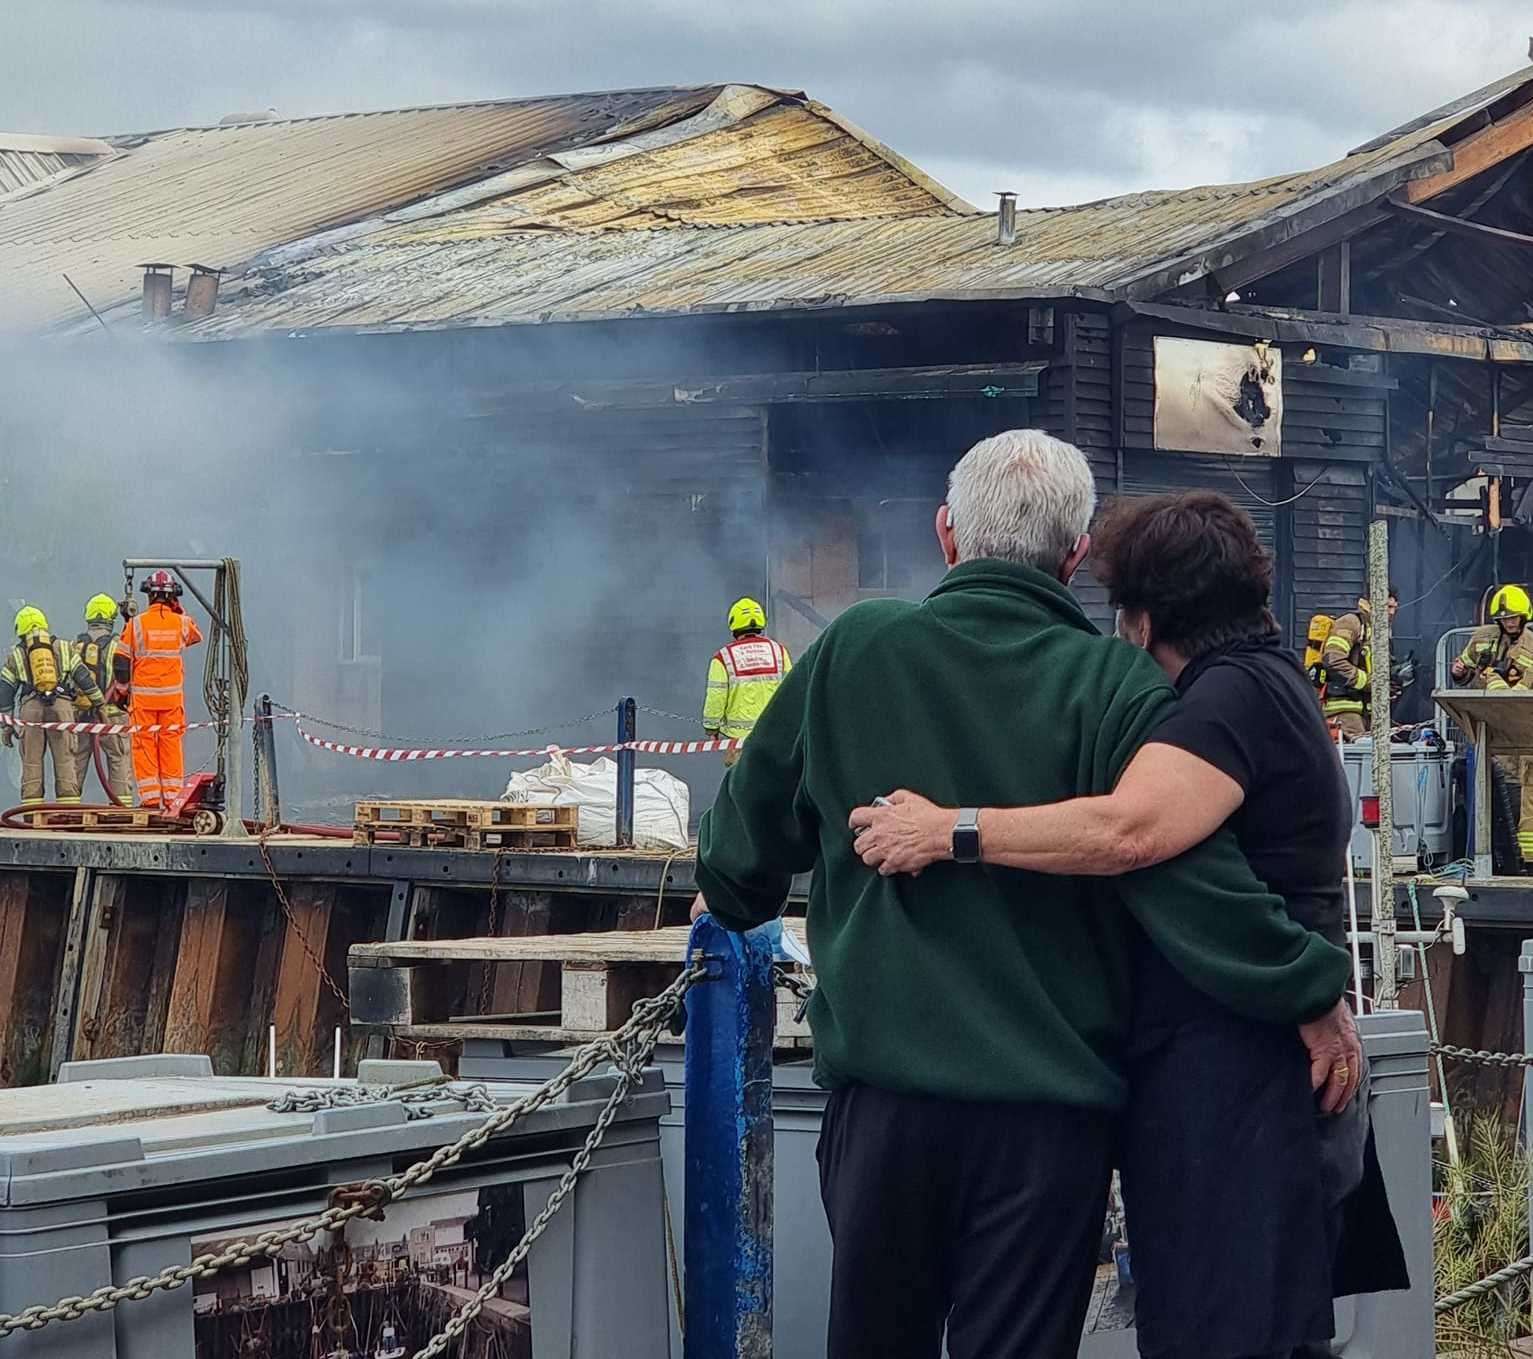 Crab and Winkle Restaurant owners Peter and Elizabeth Bennett watched as the fire engulfed their business. Picture: Charlotte Rose Nash